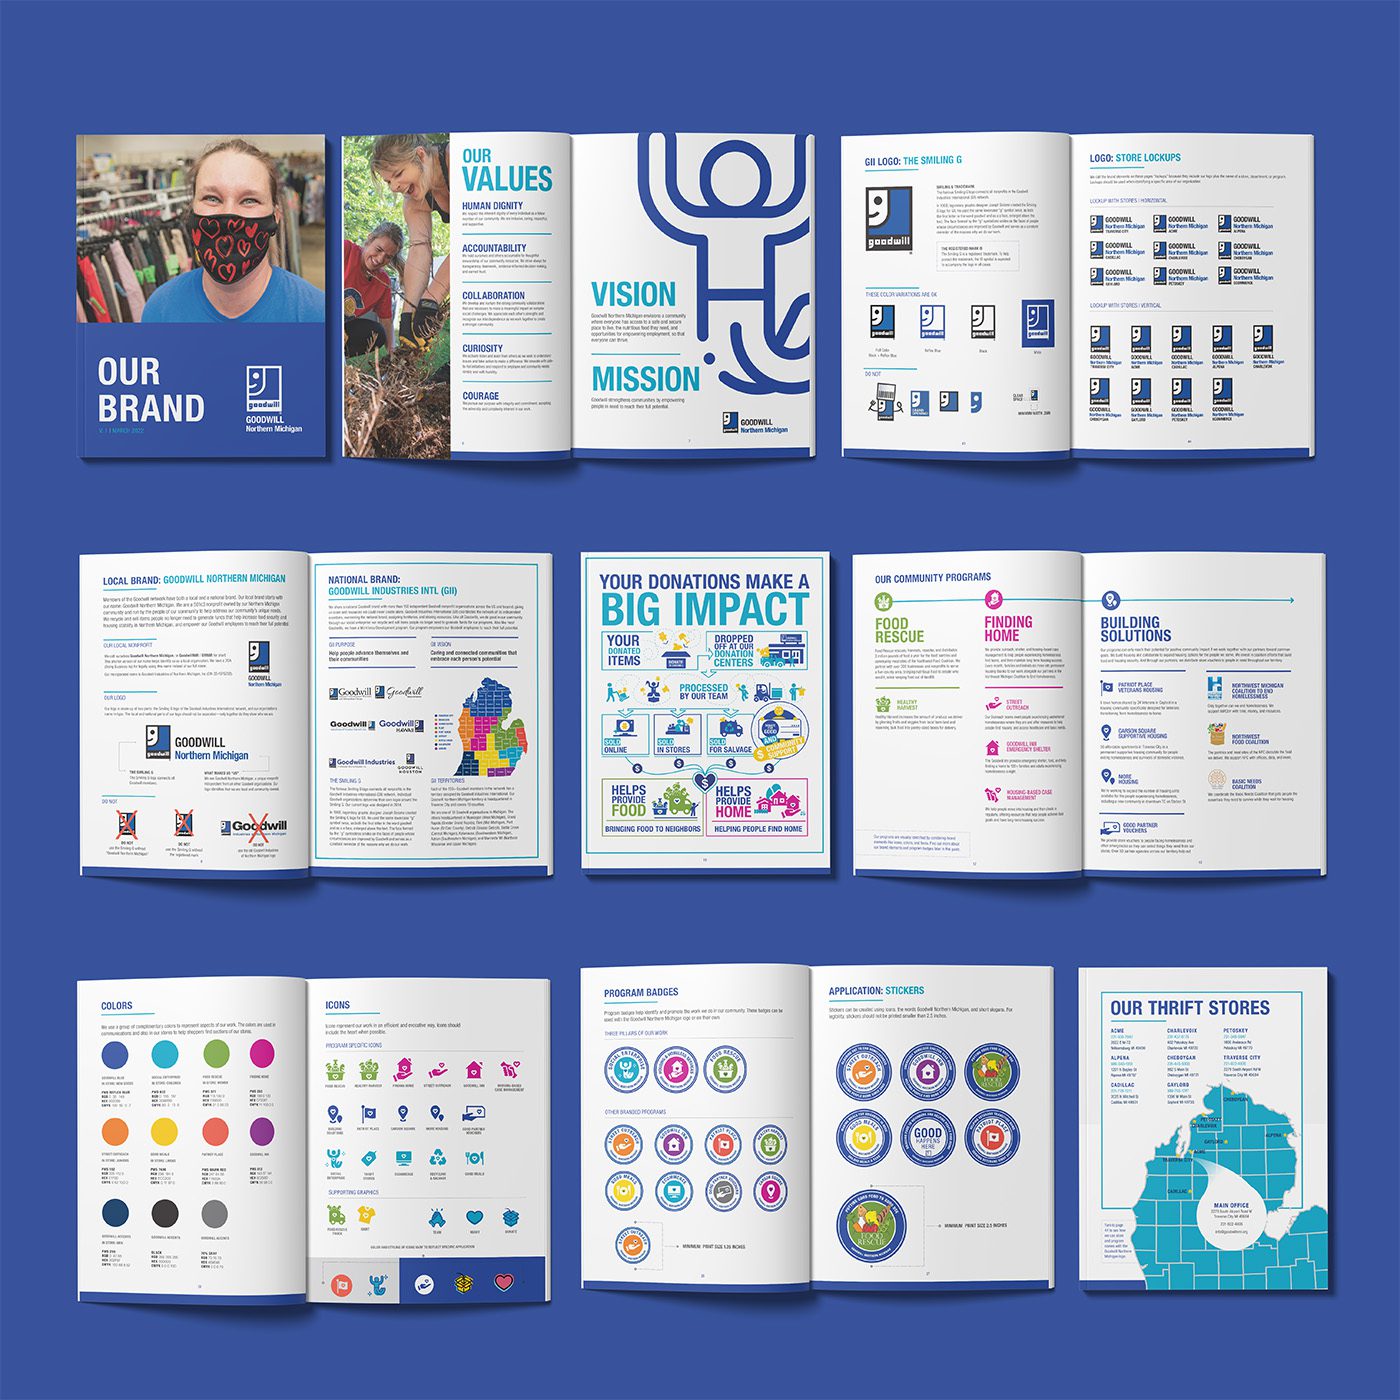 Refreshed Brand Guidelines developed for Goodwill Northern Michigan